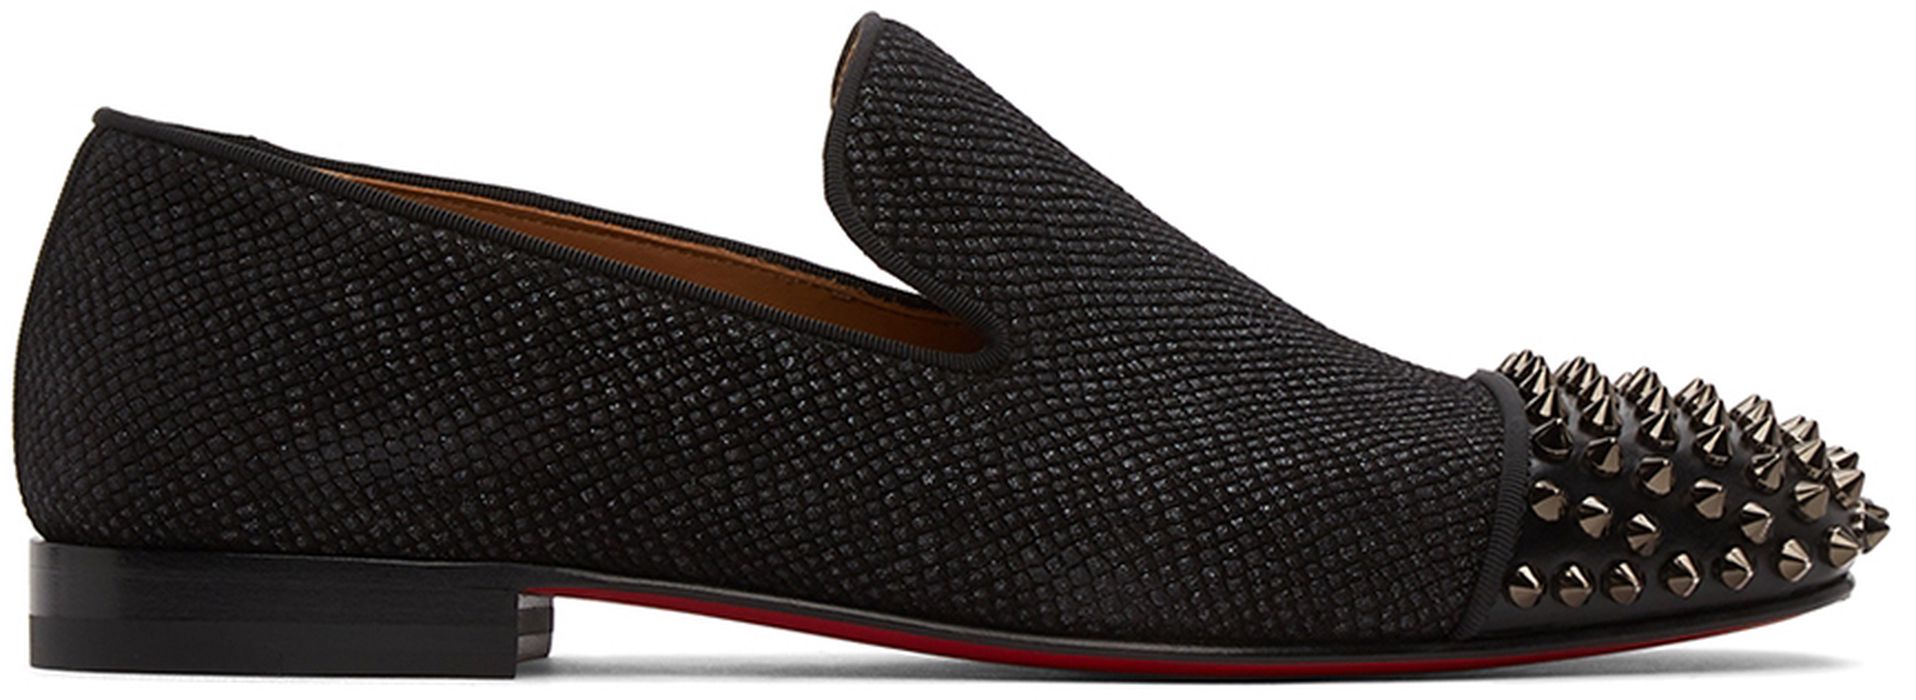 Men's Christian Louboutin Clothing - Best Deals You Need To See